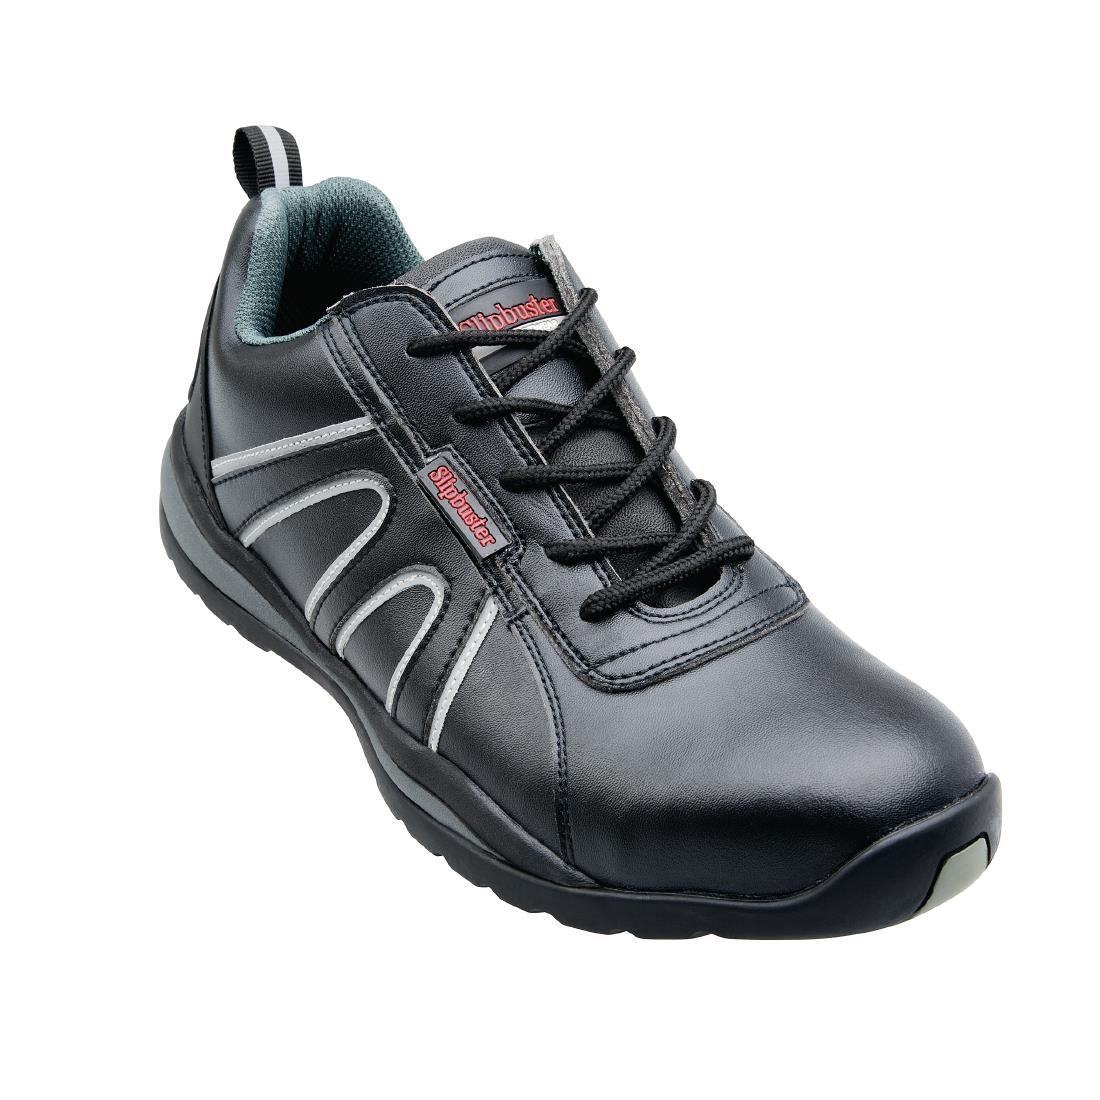 Slipbuster Safety Trainers Black 47 - A708-47  - 5